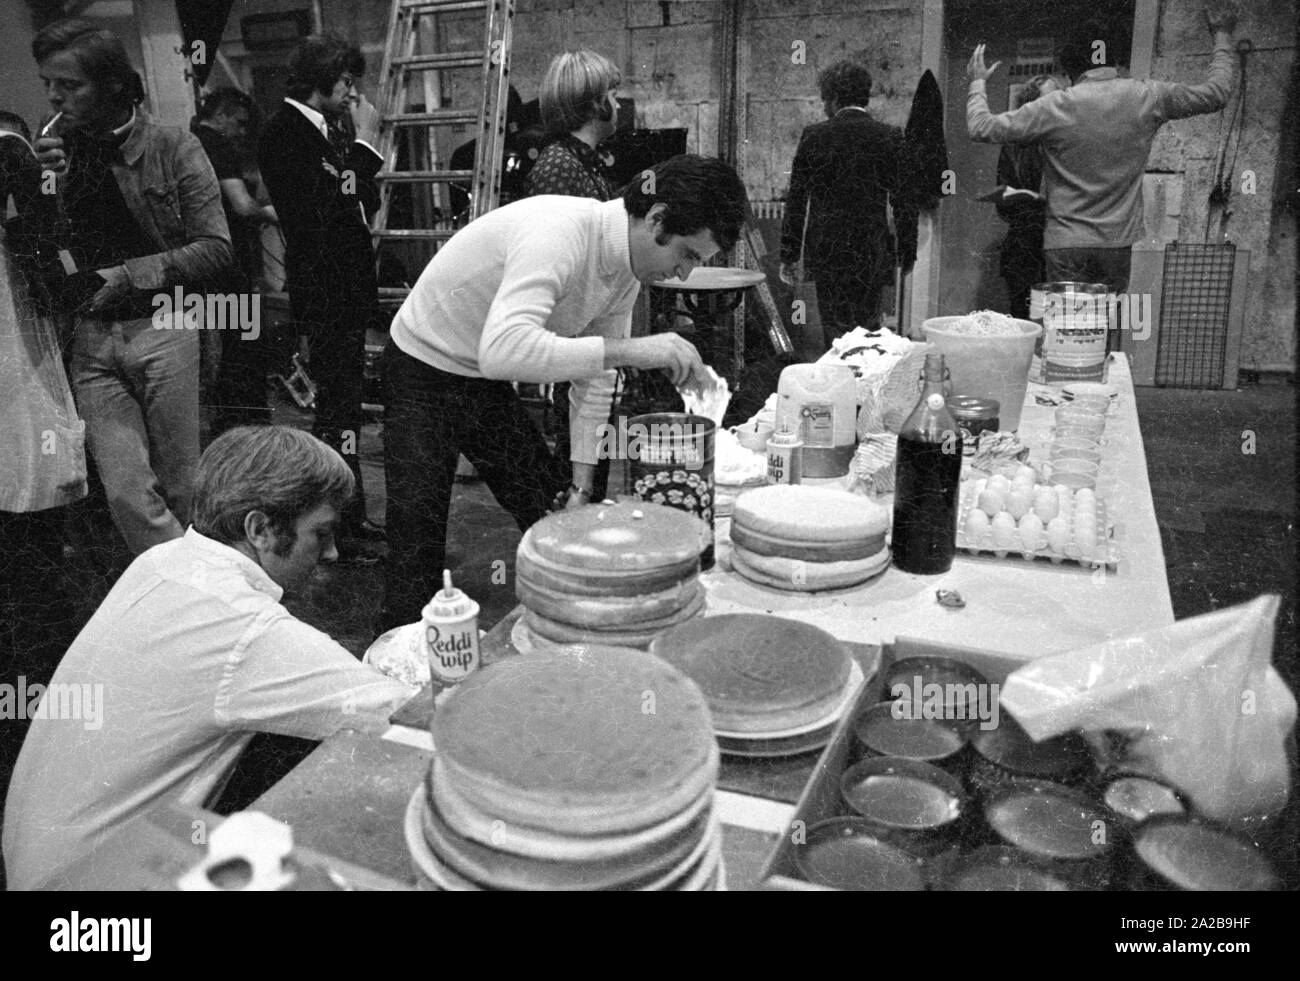 Preparations for a scene with pie throwing, probably at the filming of the TV series 'It Takes a Thief'. Stock Photo